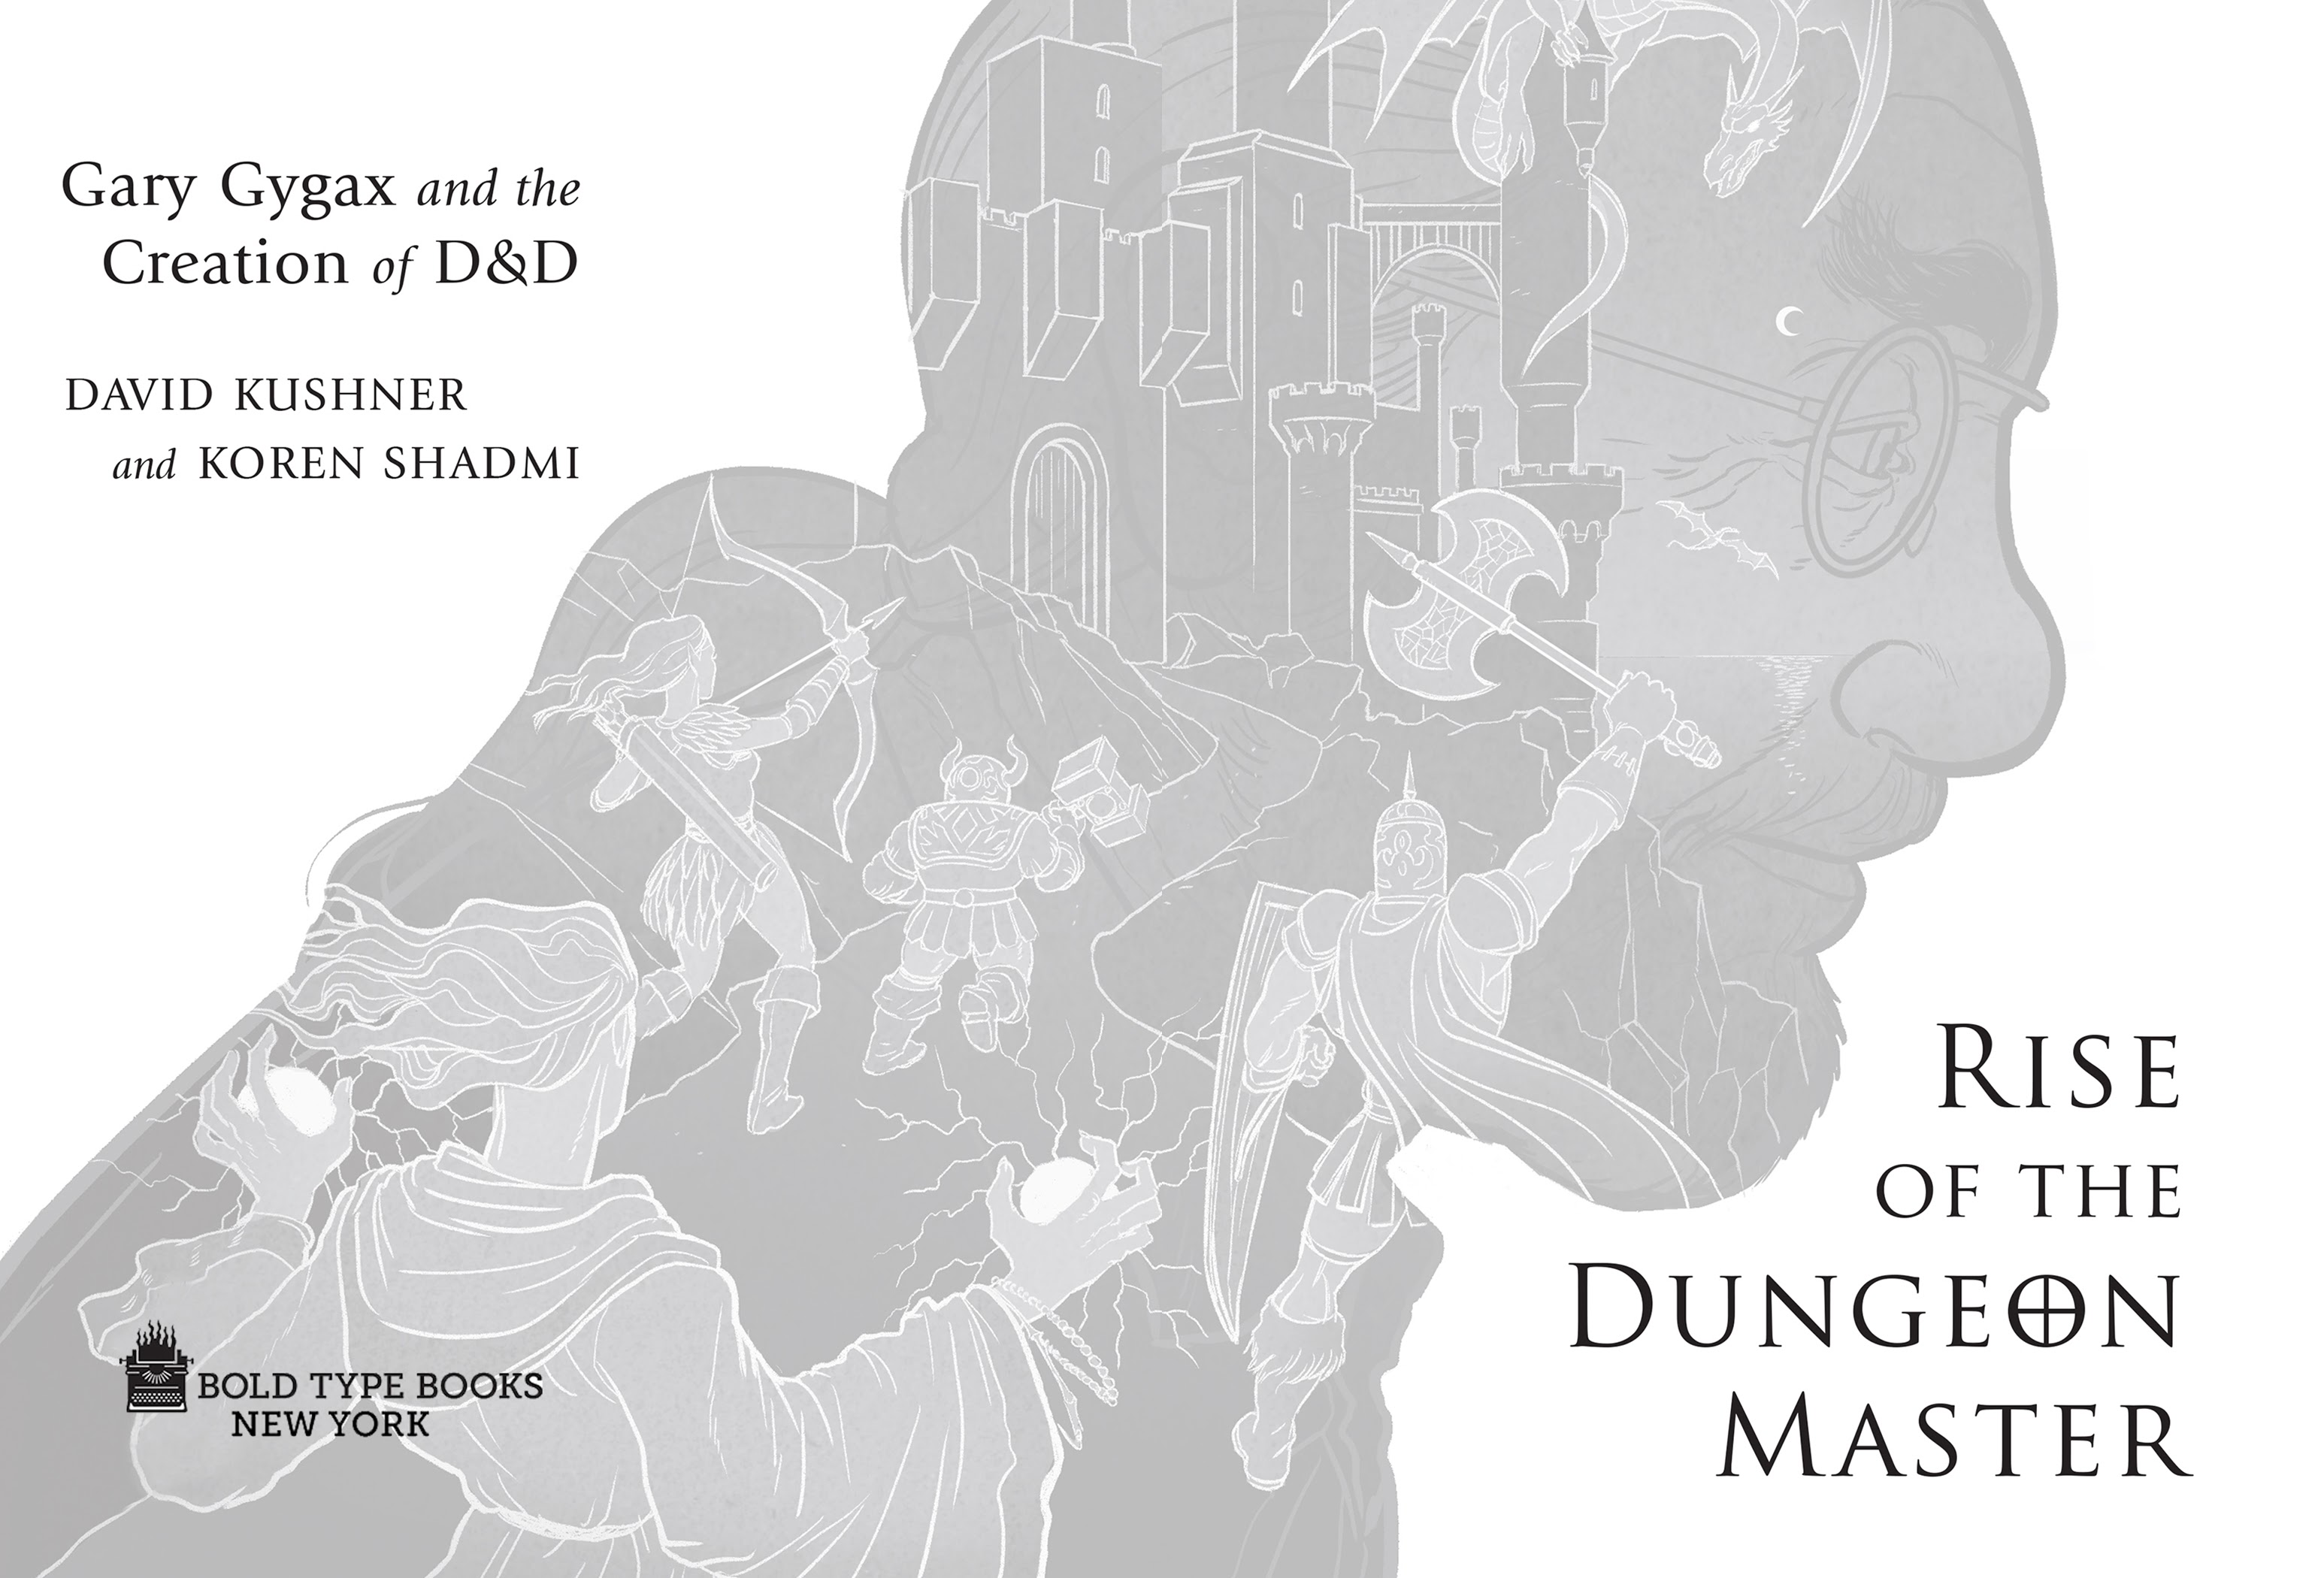 Read online Rise of the Dungeon Master: Gary Gygax and the Creation of D&D comic -  Issue # TPB - 4